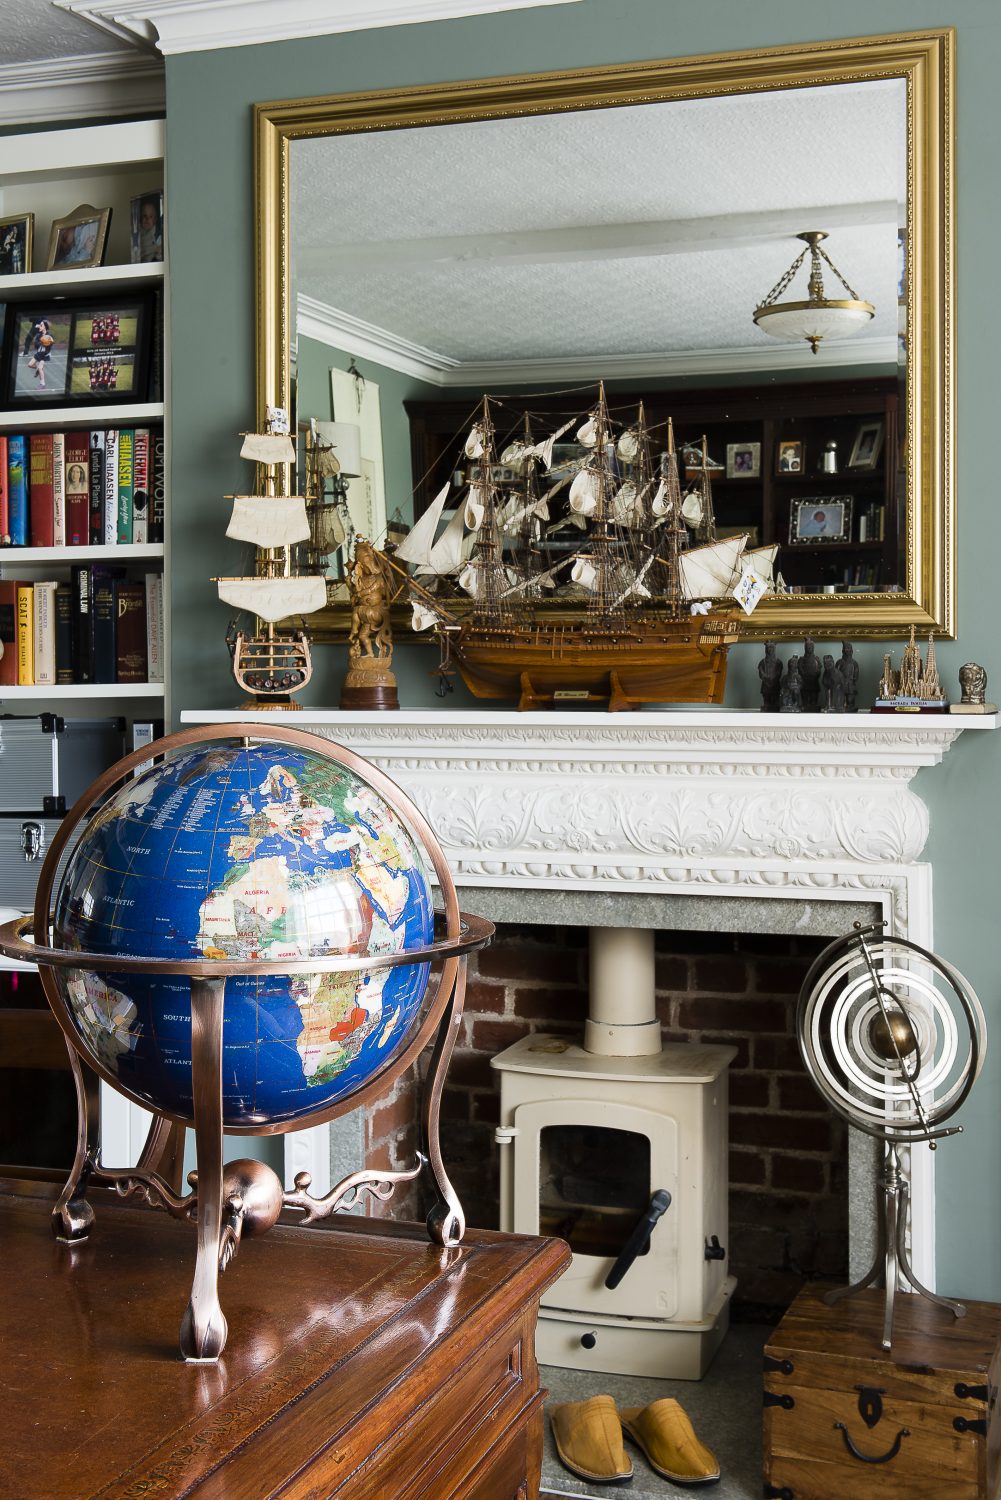 In Gerry's study, the model ships were boughts by the couple on their honeymoon. The globe is from Florida